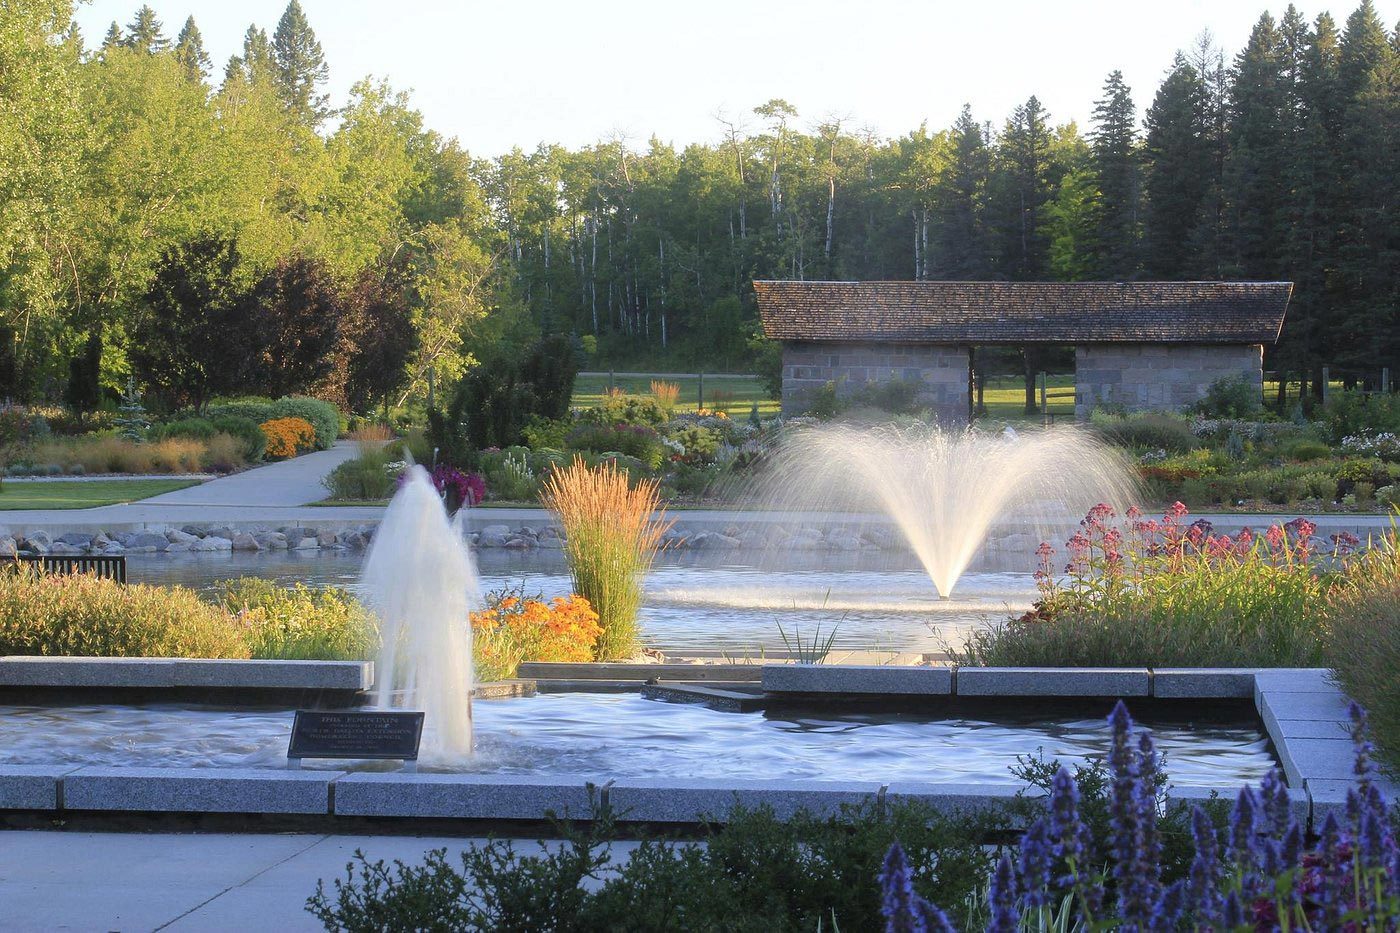 <p><a href="https://www.tripadvisor.com/Attraction_Review-g49769-d258306-Reviews-International_Peace_Garden-Dunseith_North_Dakota.html" rel="noopener">The garden</a> offers canoeing, camping, cycling and various winter activities—but its chapel is one of the most unique aspects of this hidden gem. The chapel is open for everyone to come in, sit and contemplate "a world at peace." The 3.65-square-mile park is adjacent to the International Peace Garden Border Crossing between Canada and the United States. The garden is open daily; just make sure to <a href="https://peacegarden.com/discover/#:~:text=The%20Peace%20Garden%20sits%20on,with%20copy%20of%20birth%20certificate." rel="noopener">check document requirements</a> before visiting.</p> <p class="listicle-page__cta-button-shop"><a class="shop-btn" href="https://www.tripadvisor.com/Attraction_Review-g49769-d258306-Reviews-International_Peace_Garden-Dunseith_North_Dakota.html">Learn More</a></p>